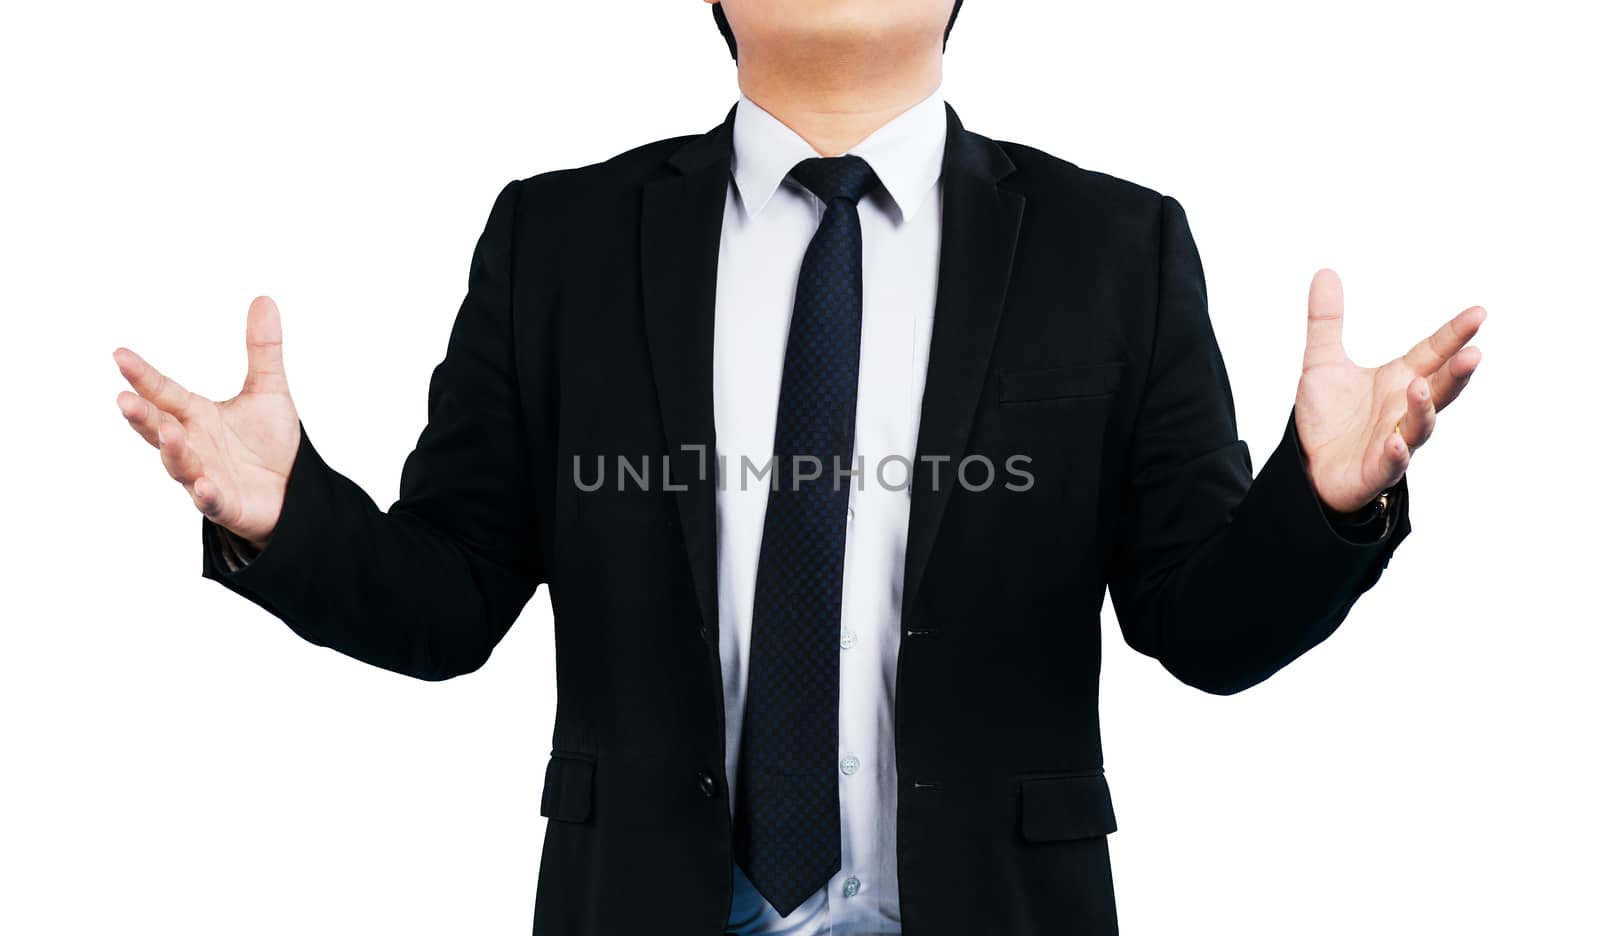 Men wear suits hands successful isolate on white background clipping path